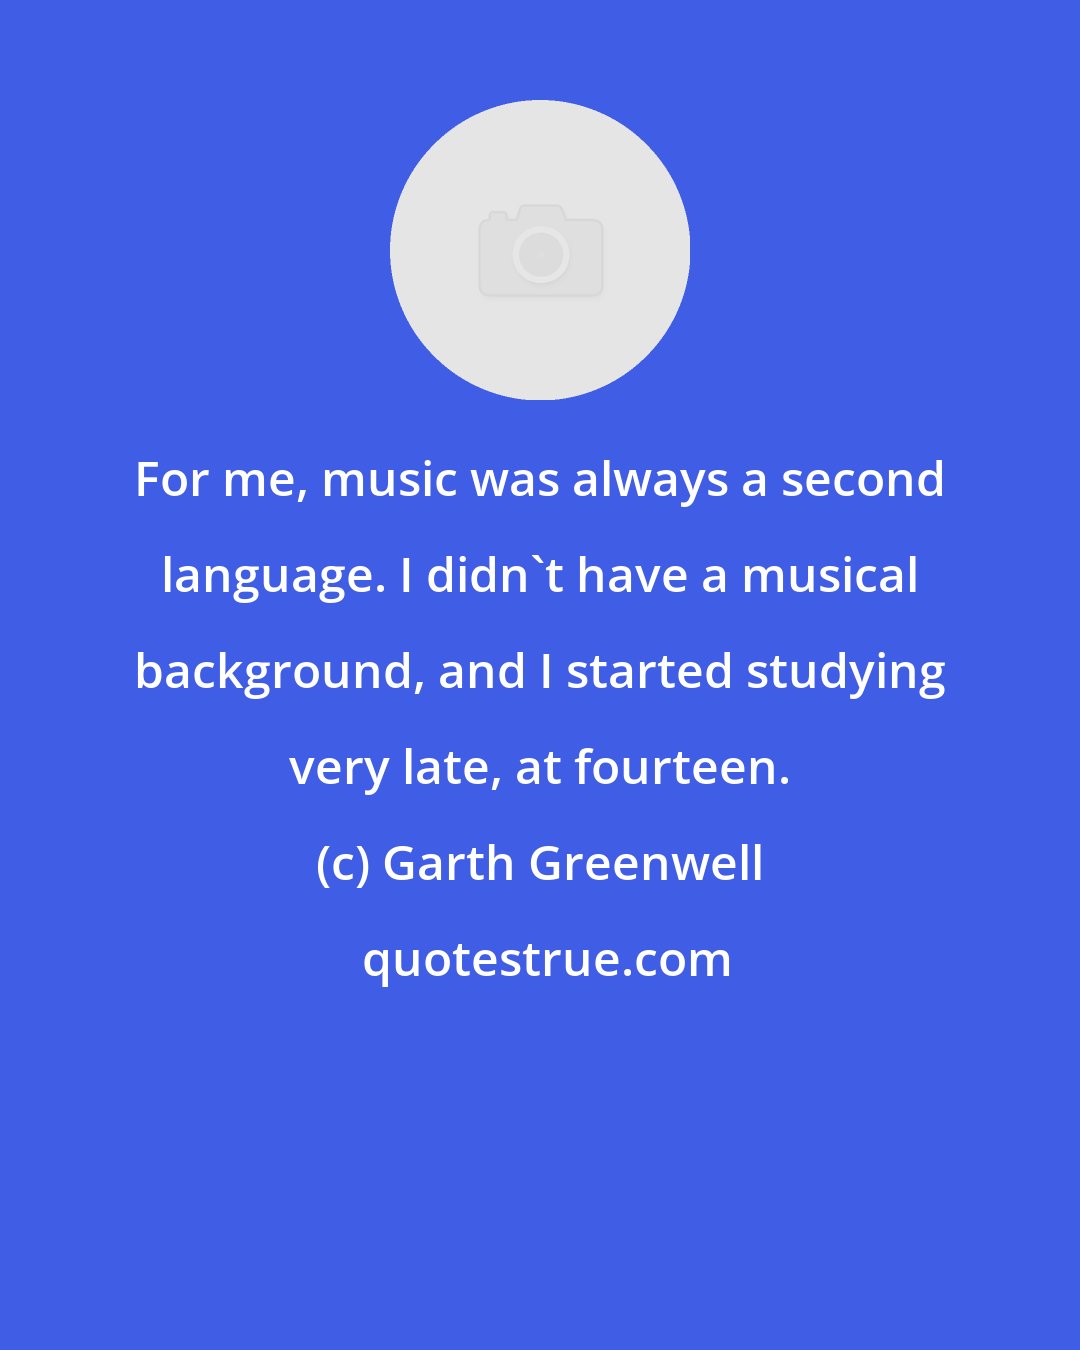 Garth Greenwell: For me, music was always a second language. I didn't have a musical background, and I started studying very late, at fourteen.